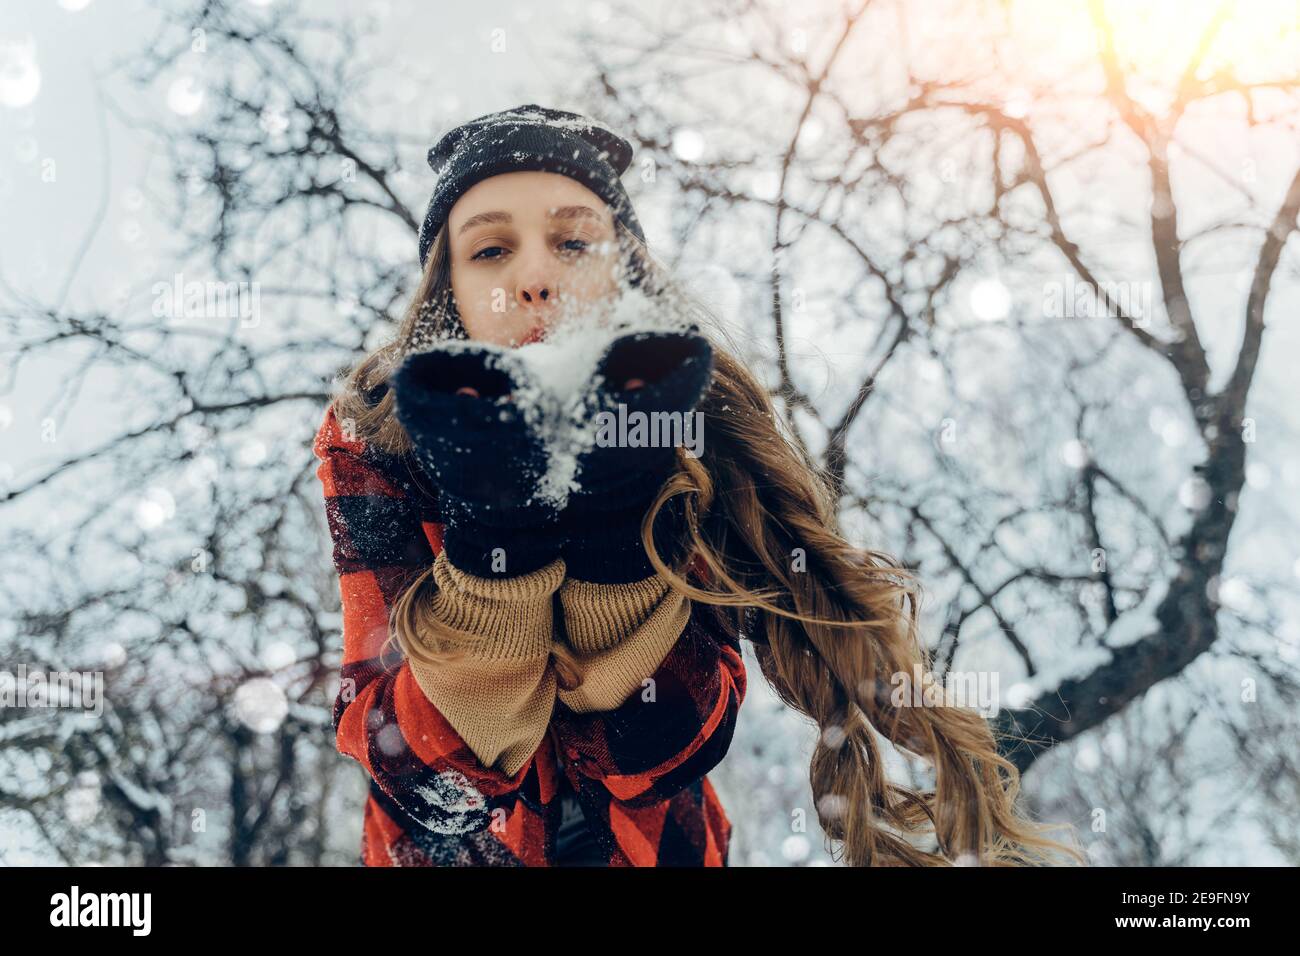 Woman Wearing Warm Winter Clothes And Hat Blowing Snow In Winter Park. Flying Snowflakes. Sunny day. Joyful Beauty young girl Having Fun in frosty Stock Photo